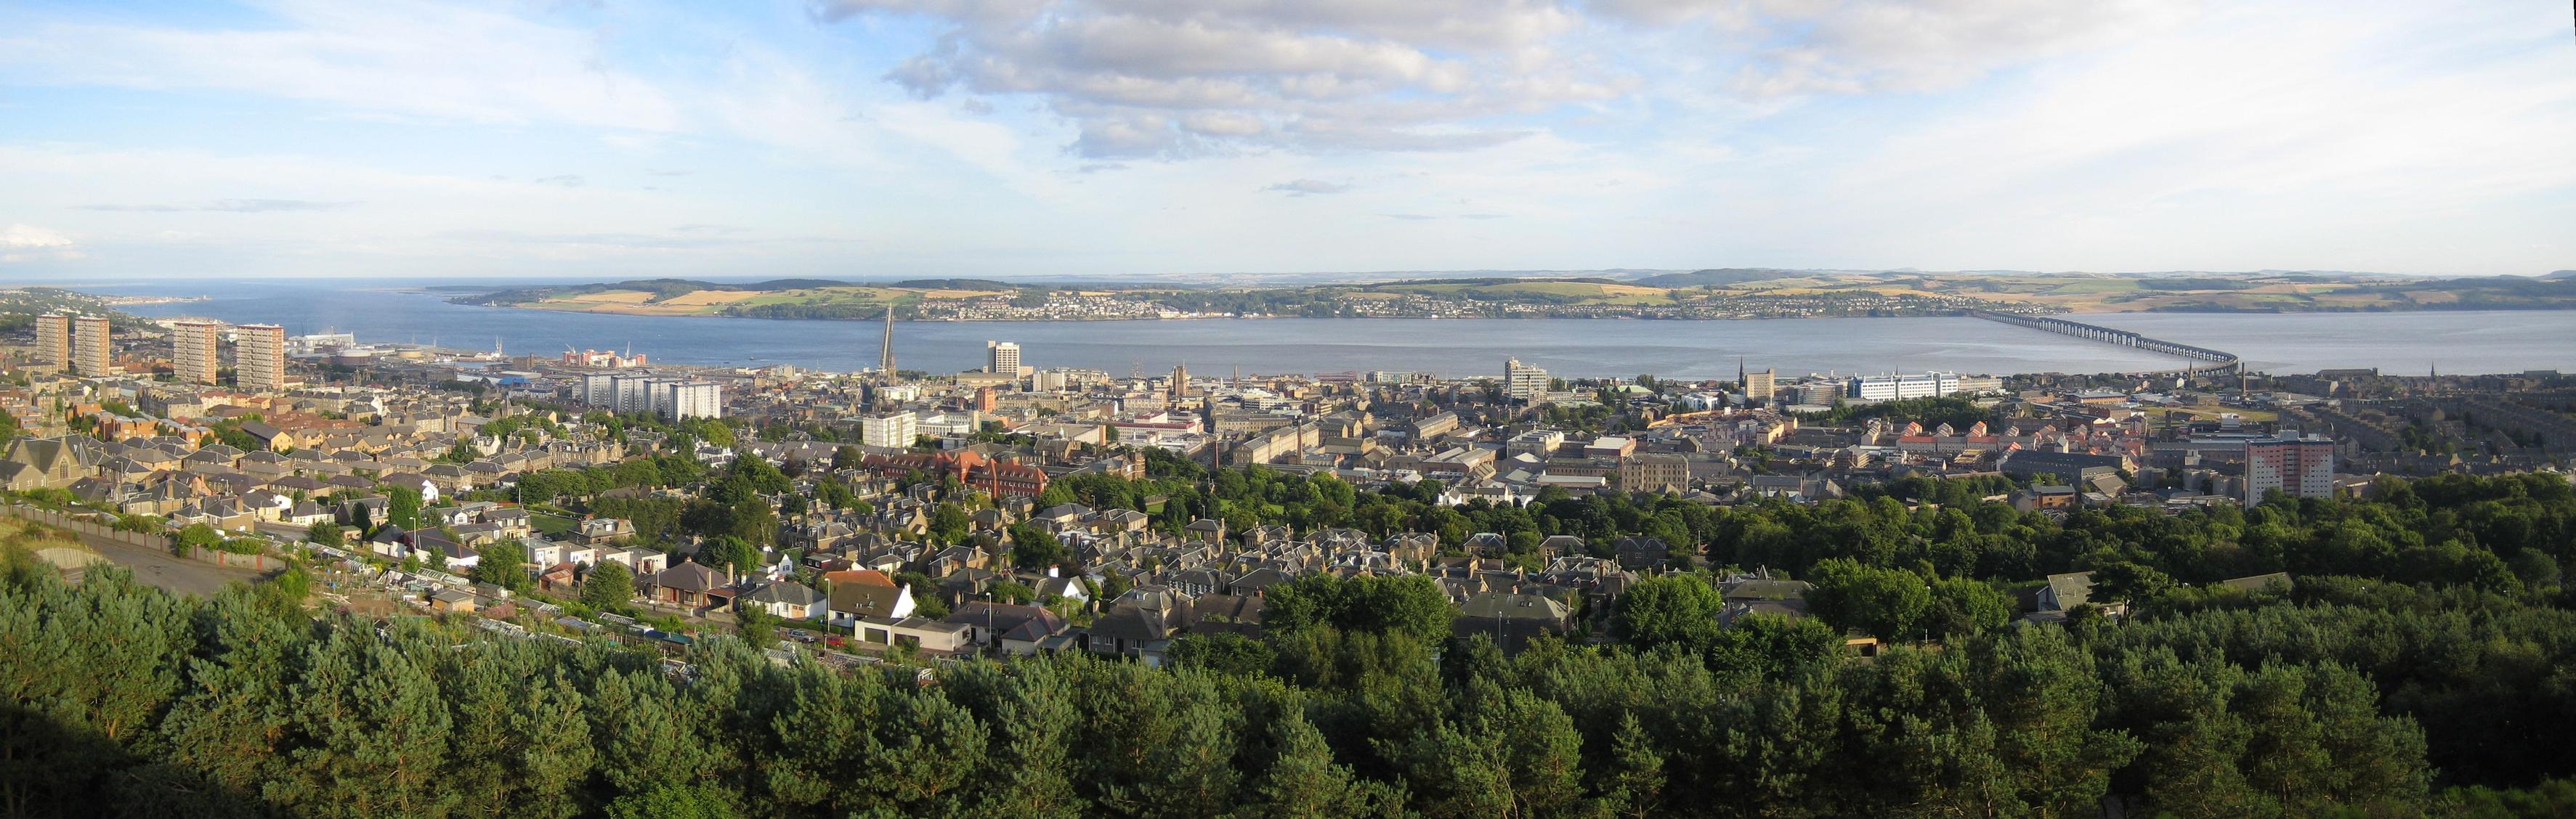 Dundee is showing that new mobility innovations can be scaled up to cities round the UK and across the globe. 
Dundee panorama: Photo Hans Musil, CC